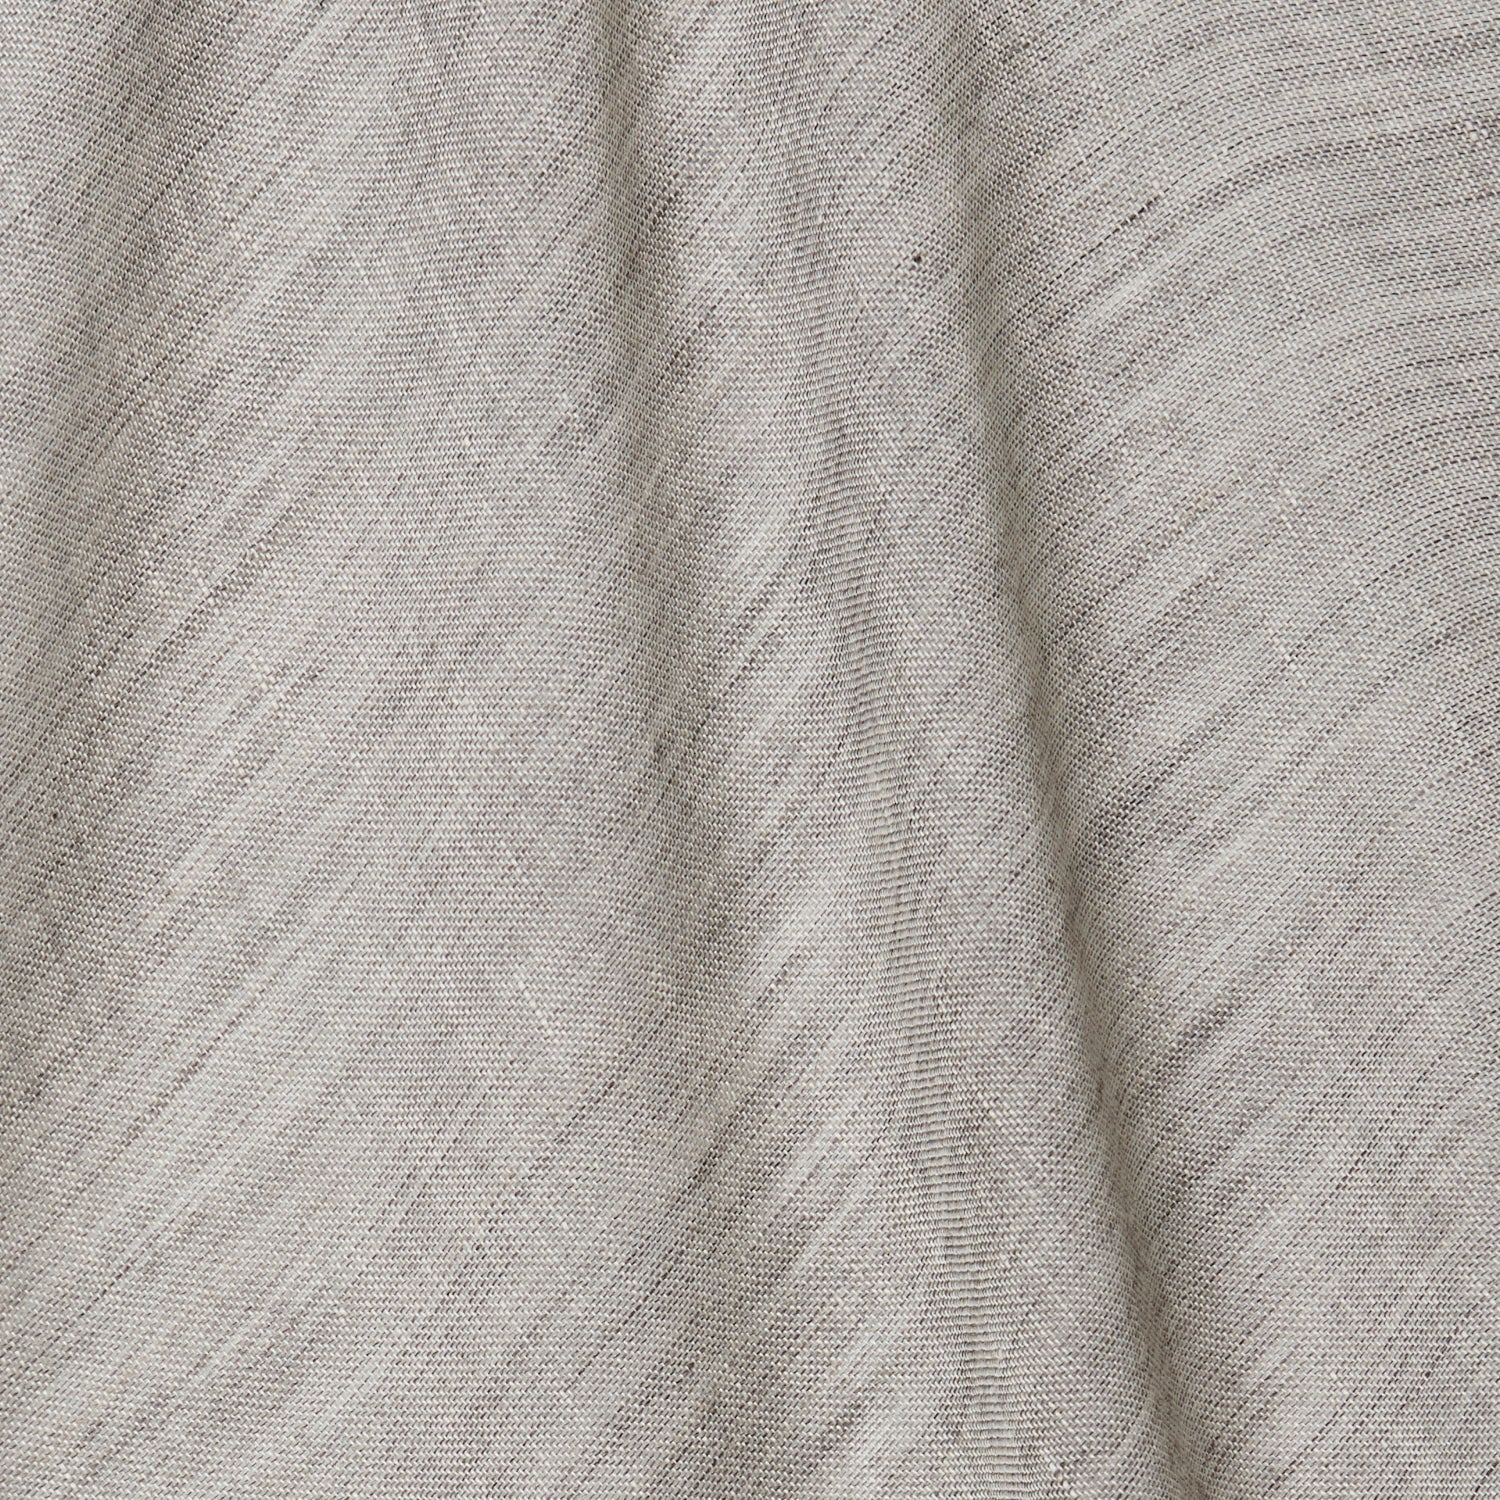 A draped swatch of open-weave sheer interior fabric in a mottled light gray color.